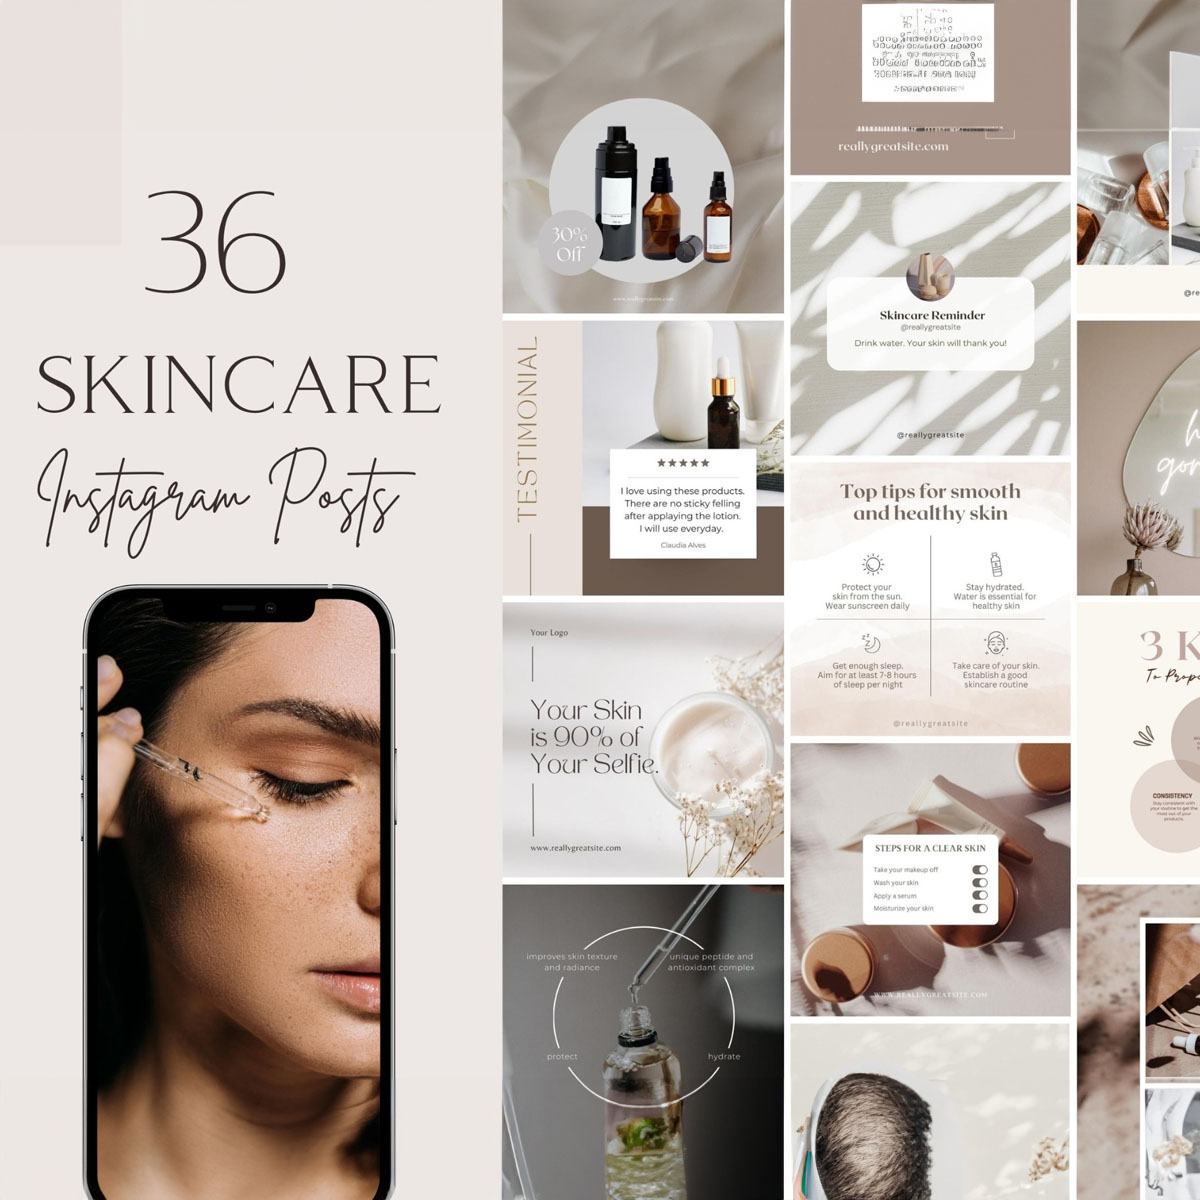 Social Media’s Influence On Student Skincare Choices